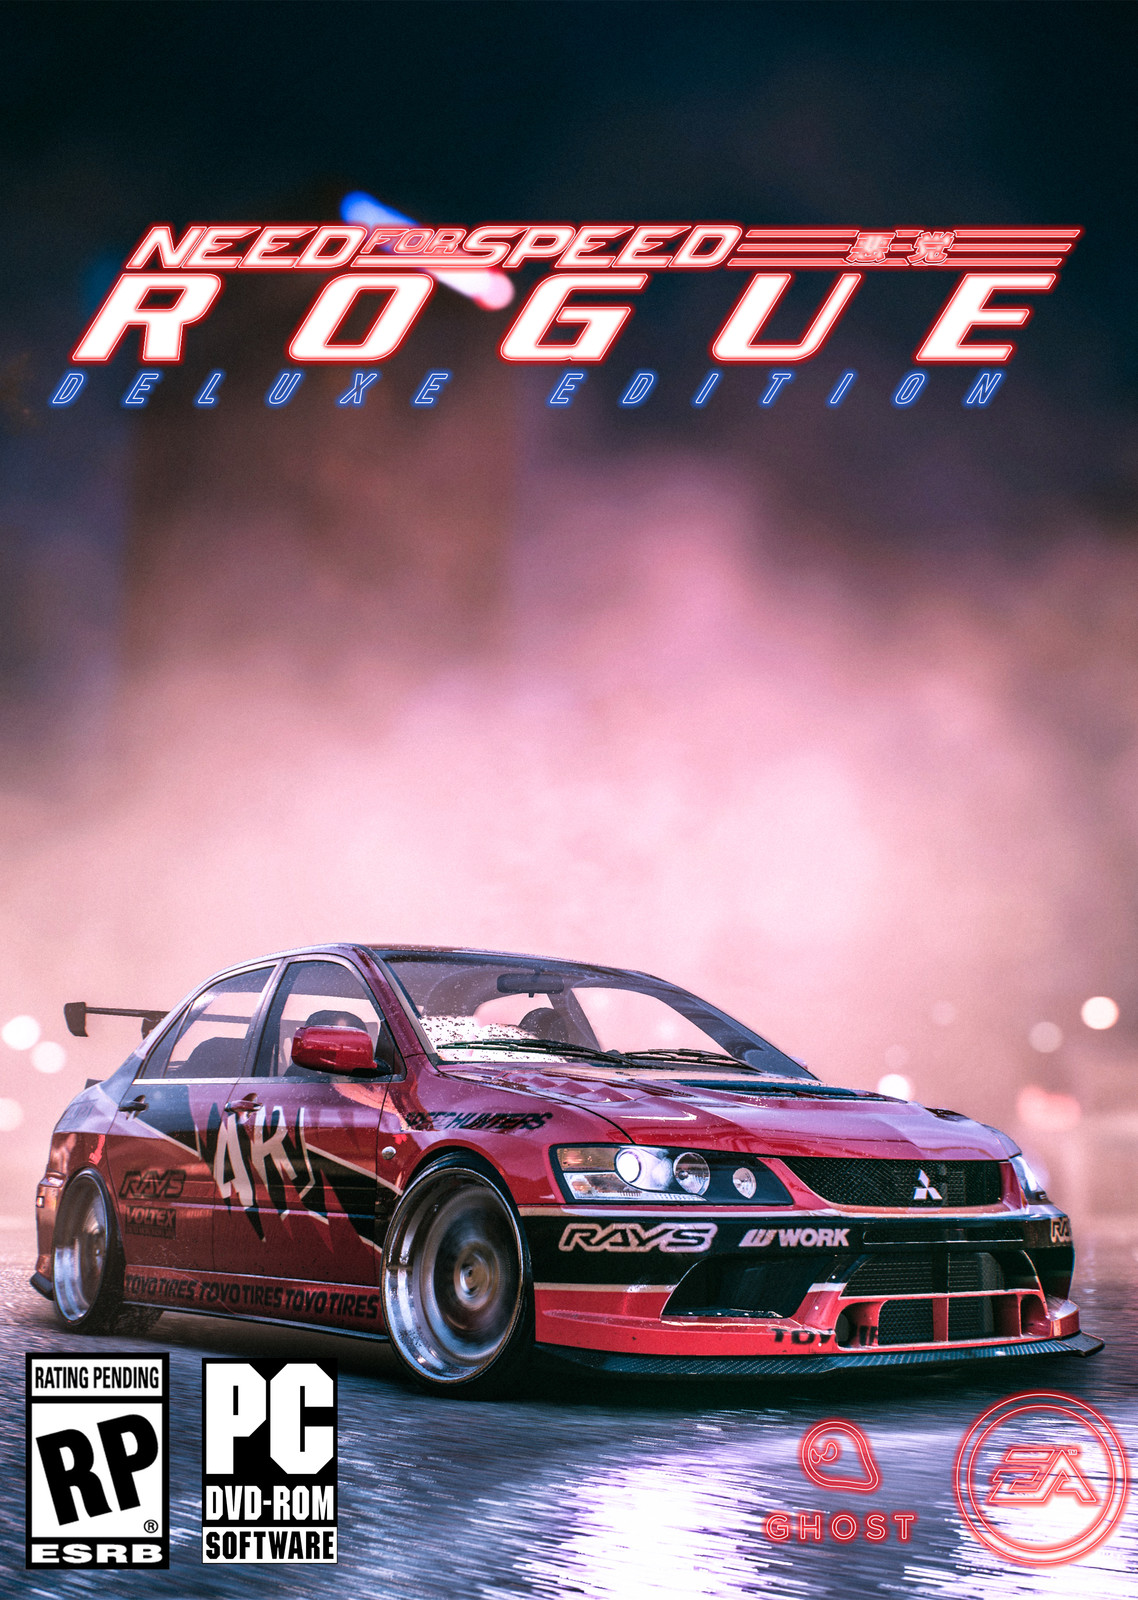 Need for Speed Rogue - Deluxe Edition (EU Cover) [Original Image by Wiiliam Bierman]